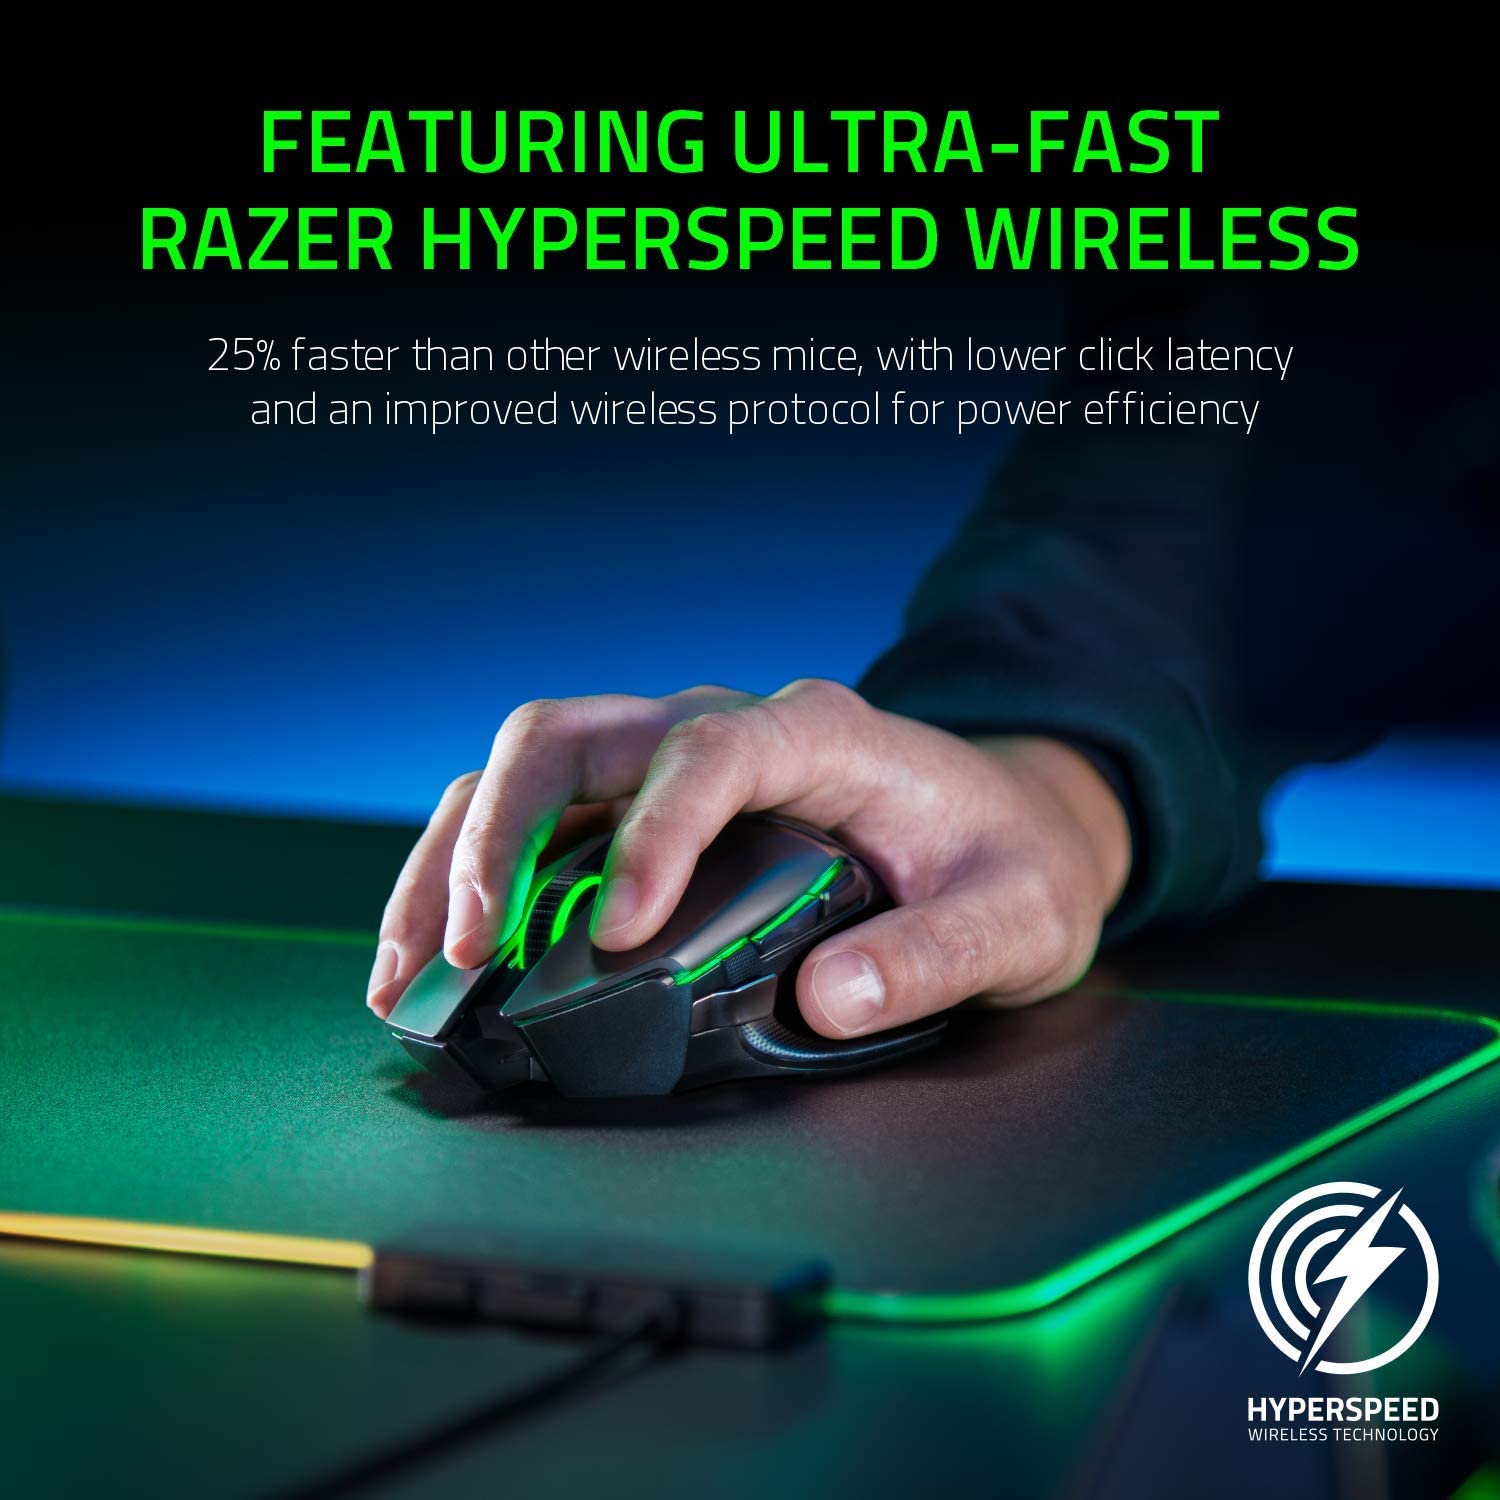 Razer Basilisk Ultimate HyperSpeed Wireless Gaming Mouse with Charging Dock